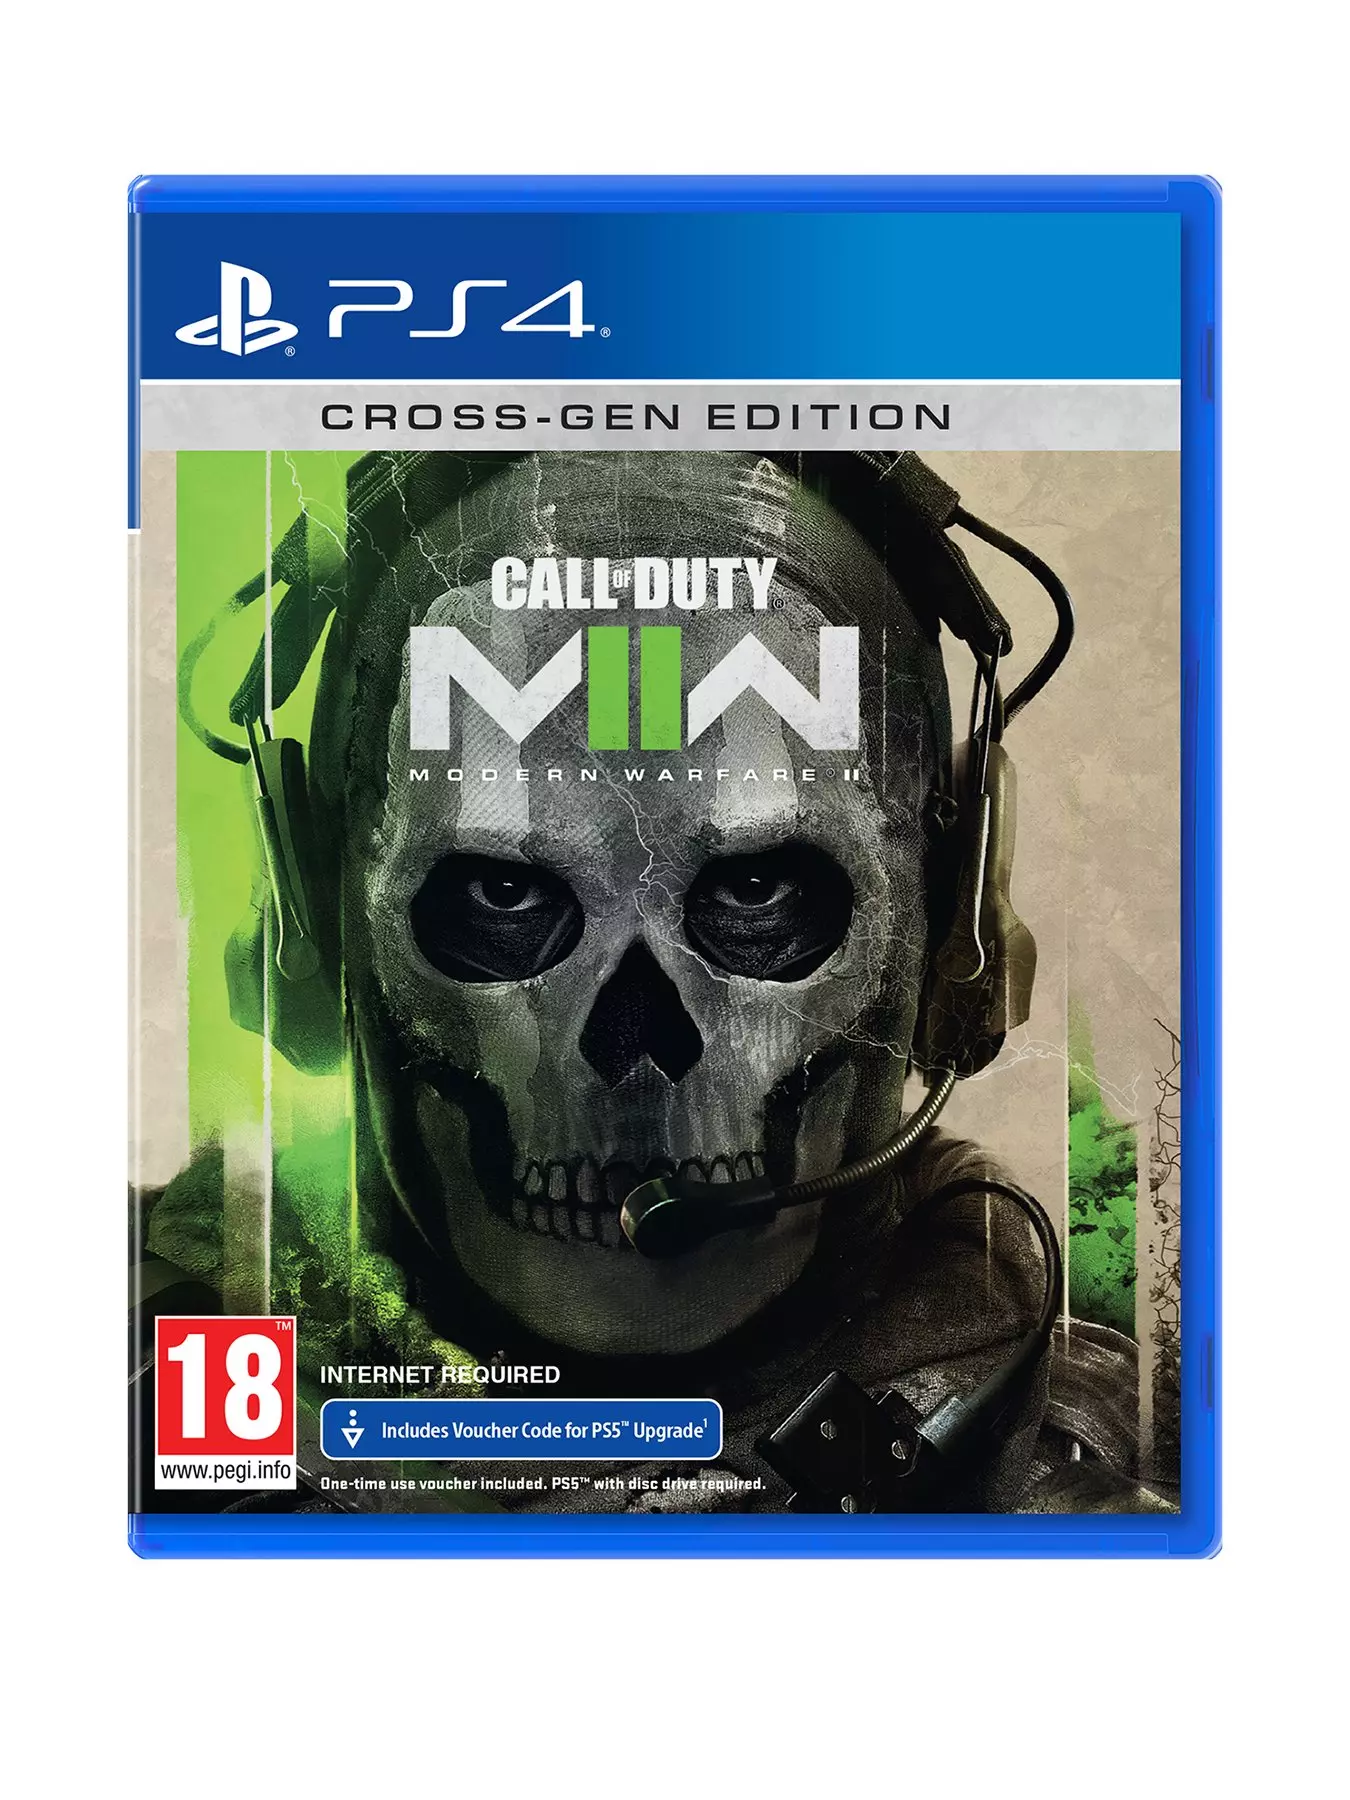 The Hunter: Call of the Wild 2019 Edition - PlayStation 4, PlayStation 4